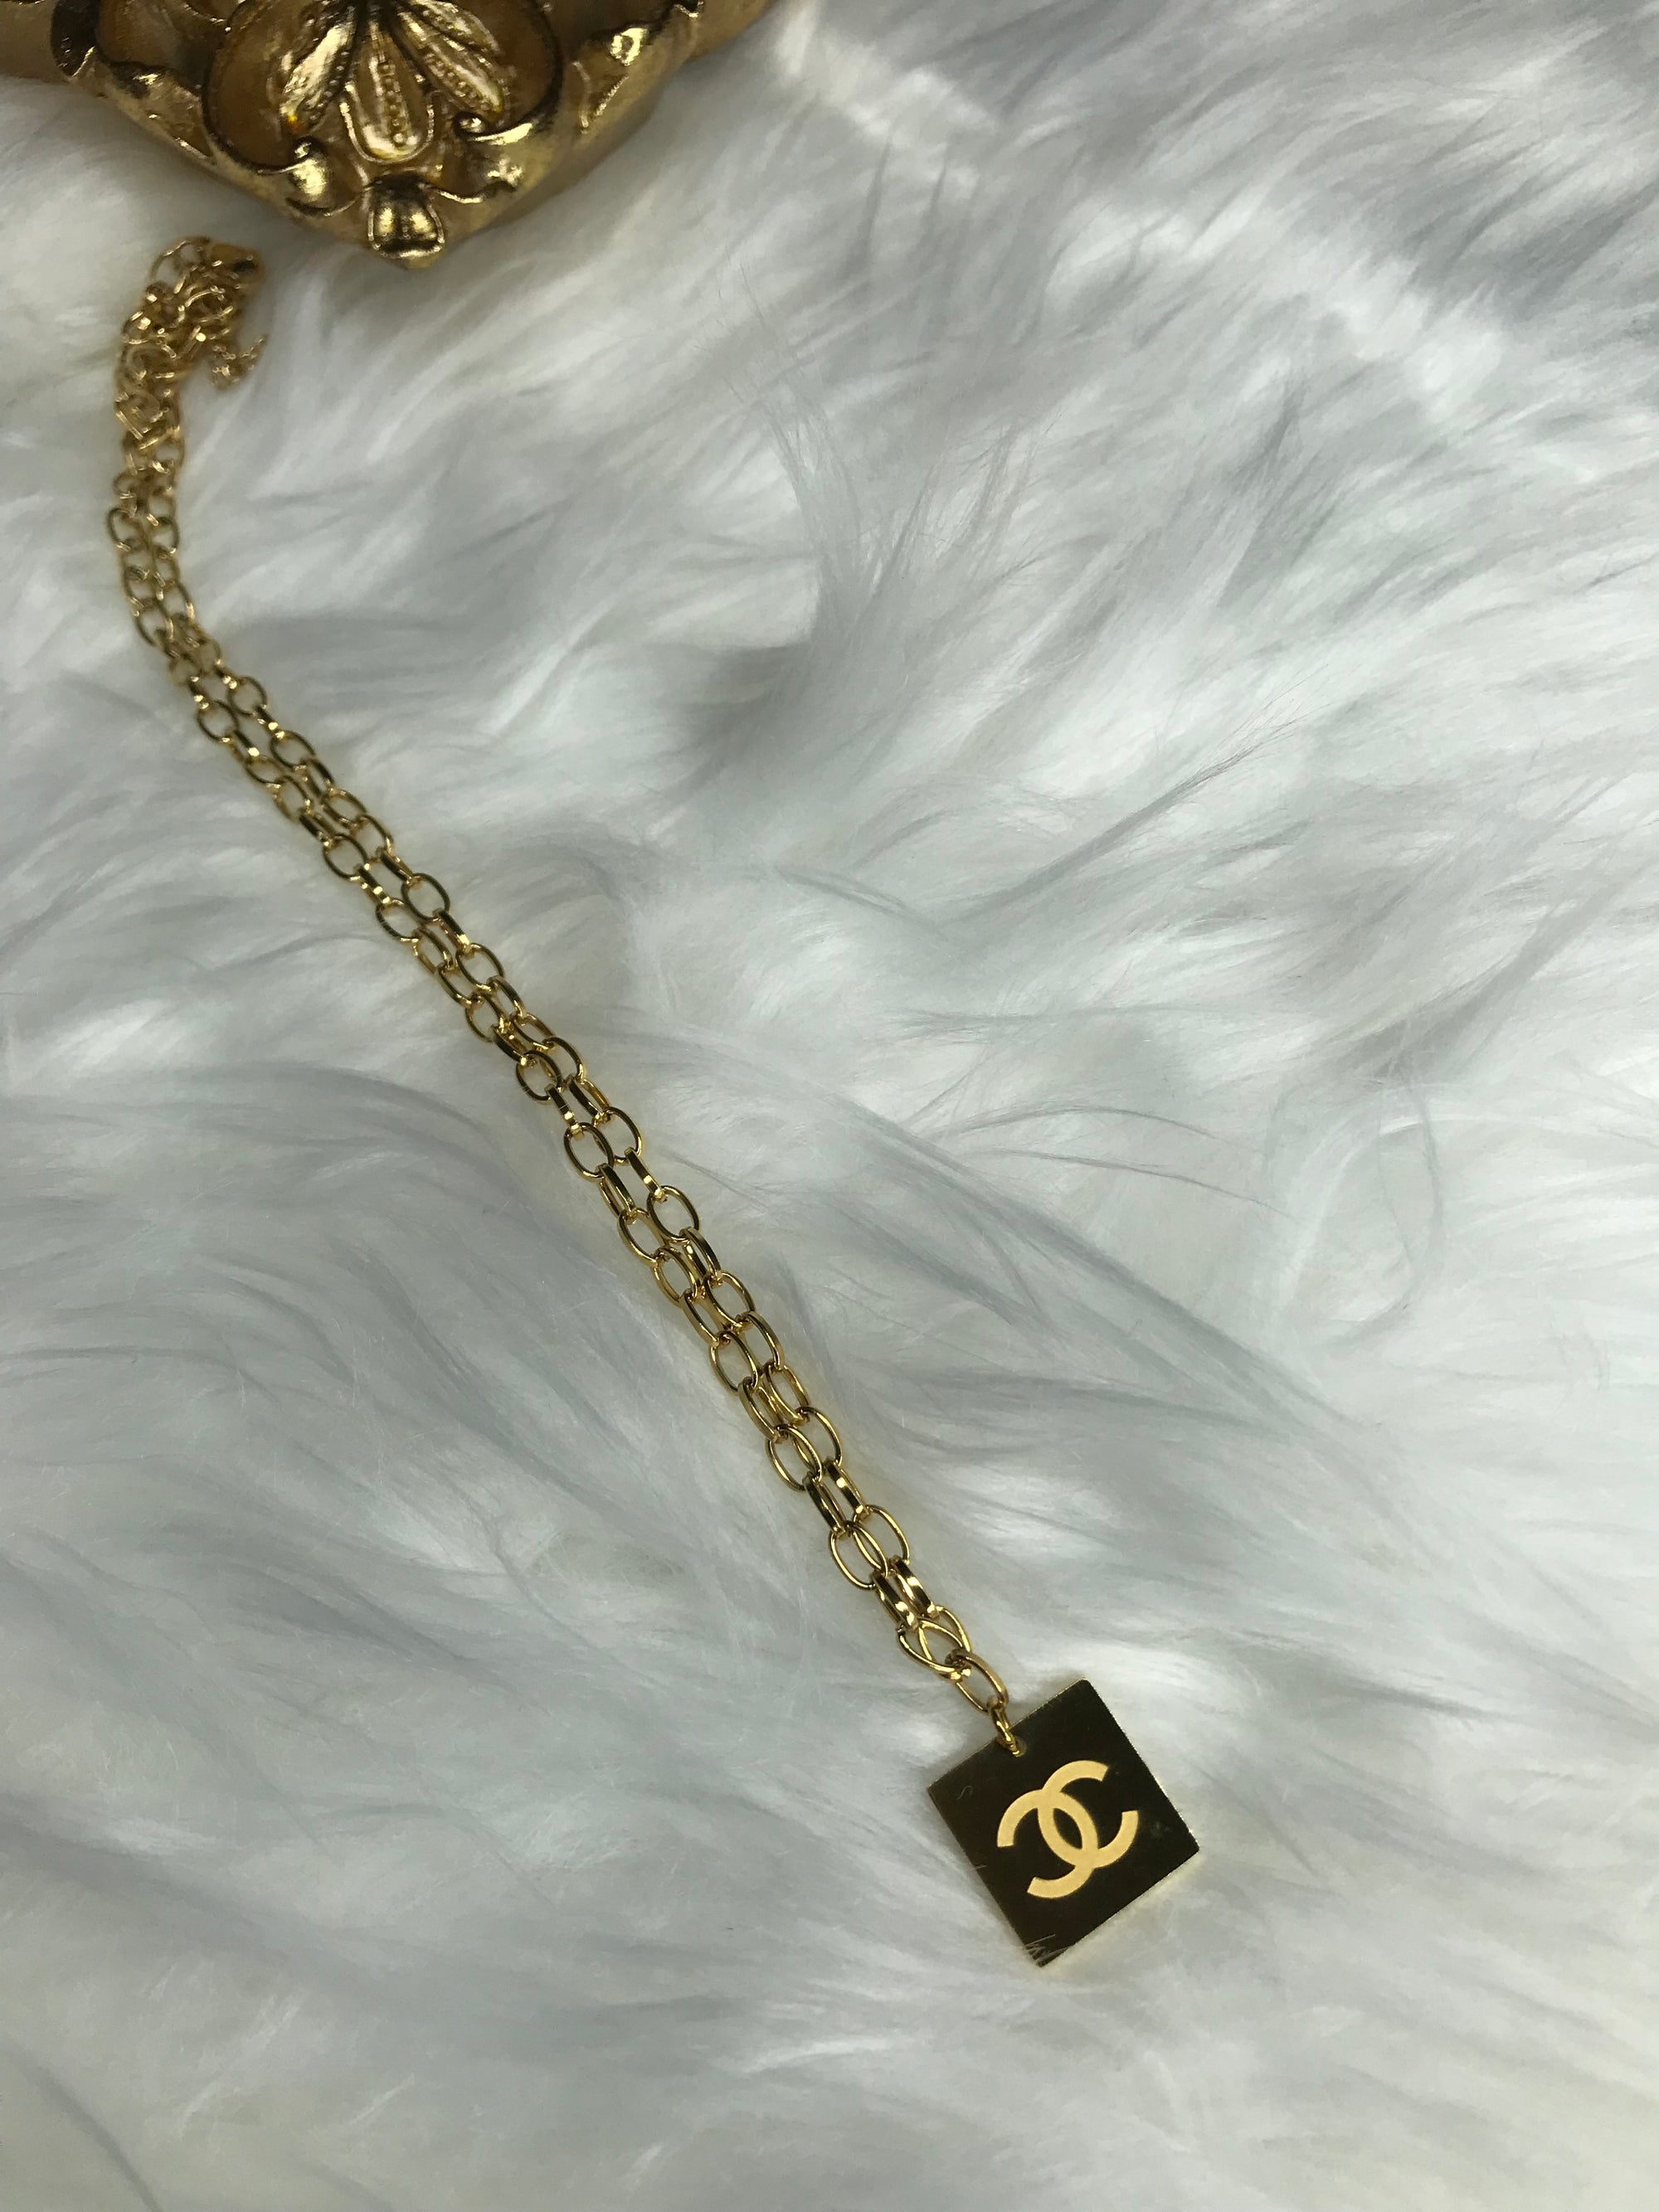 [Japan Used Necklace] Louis Vuitton Necklace Collier Baby Ease Lv Circle  Charm